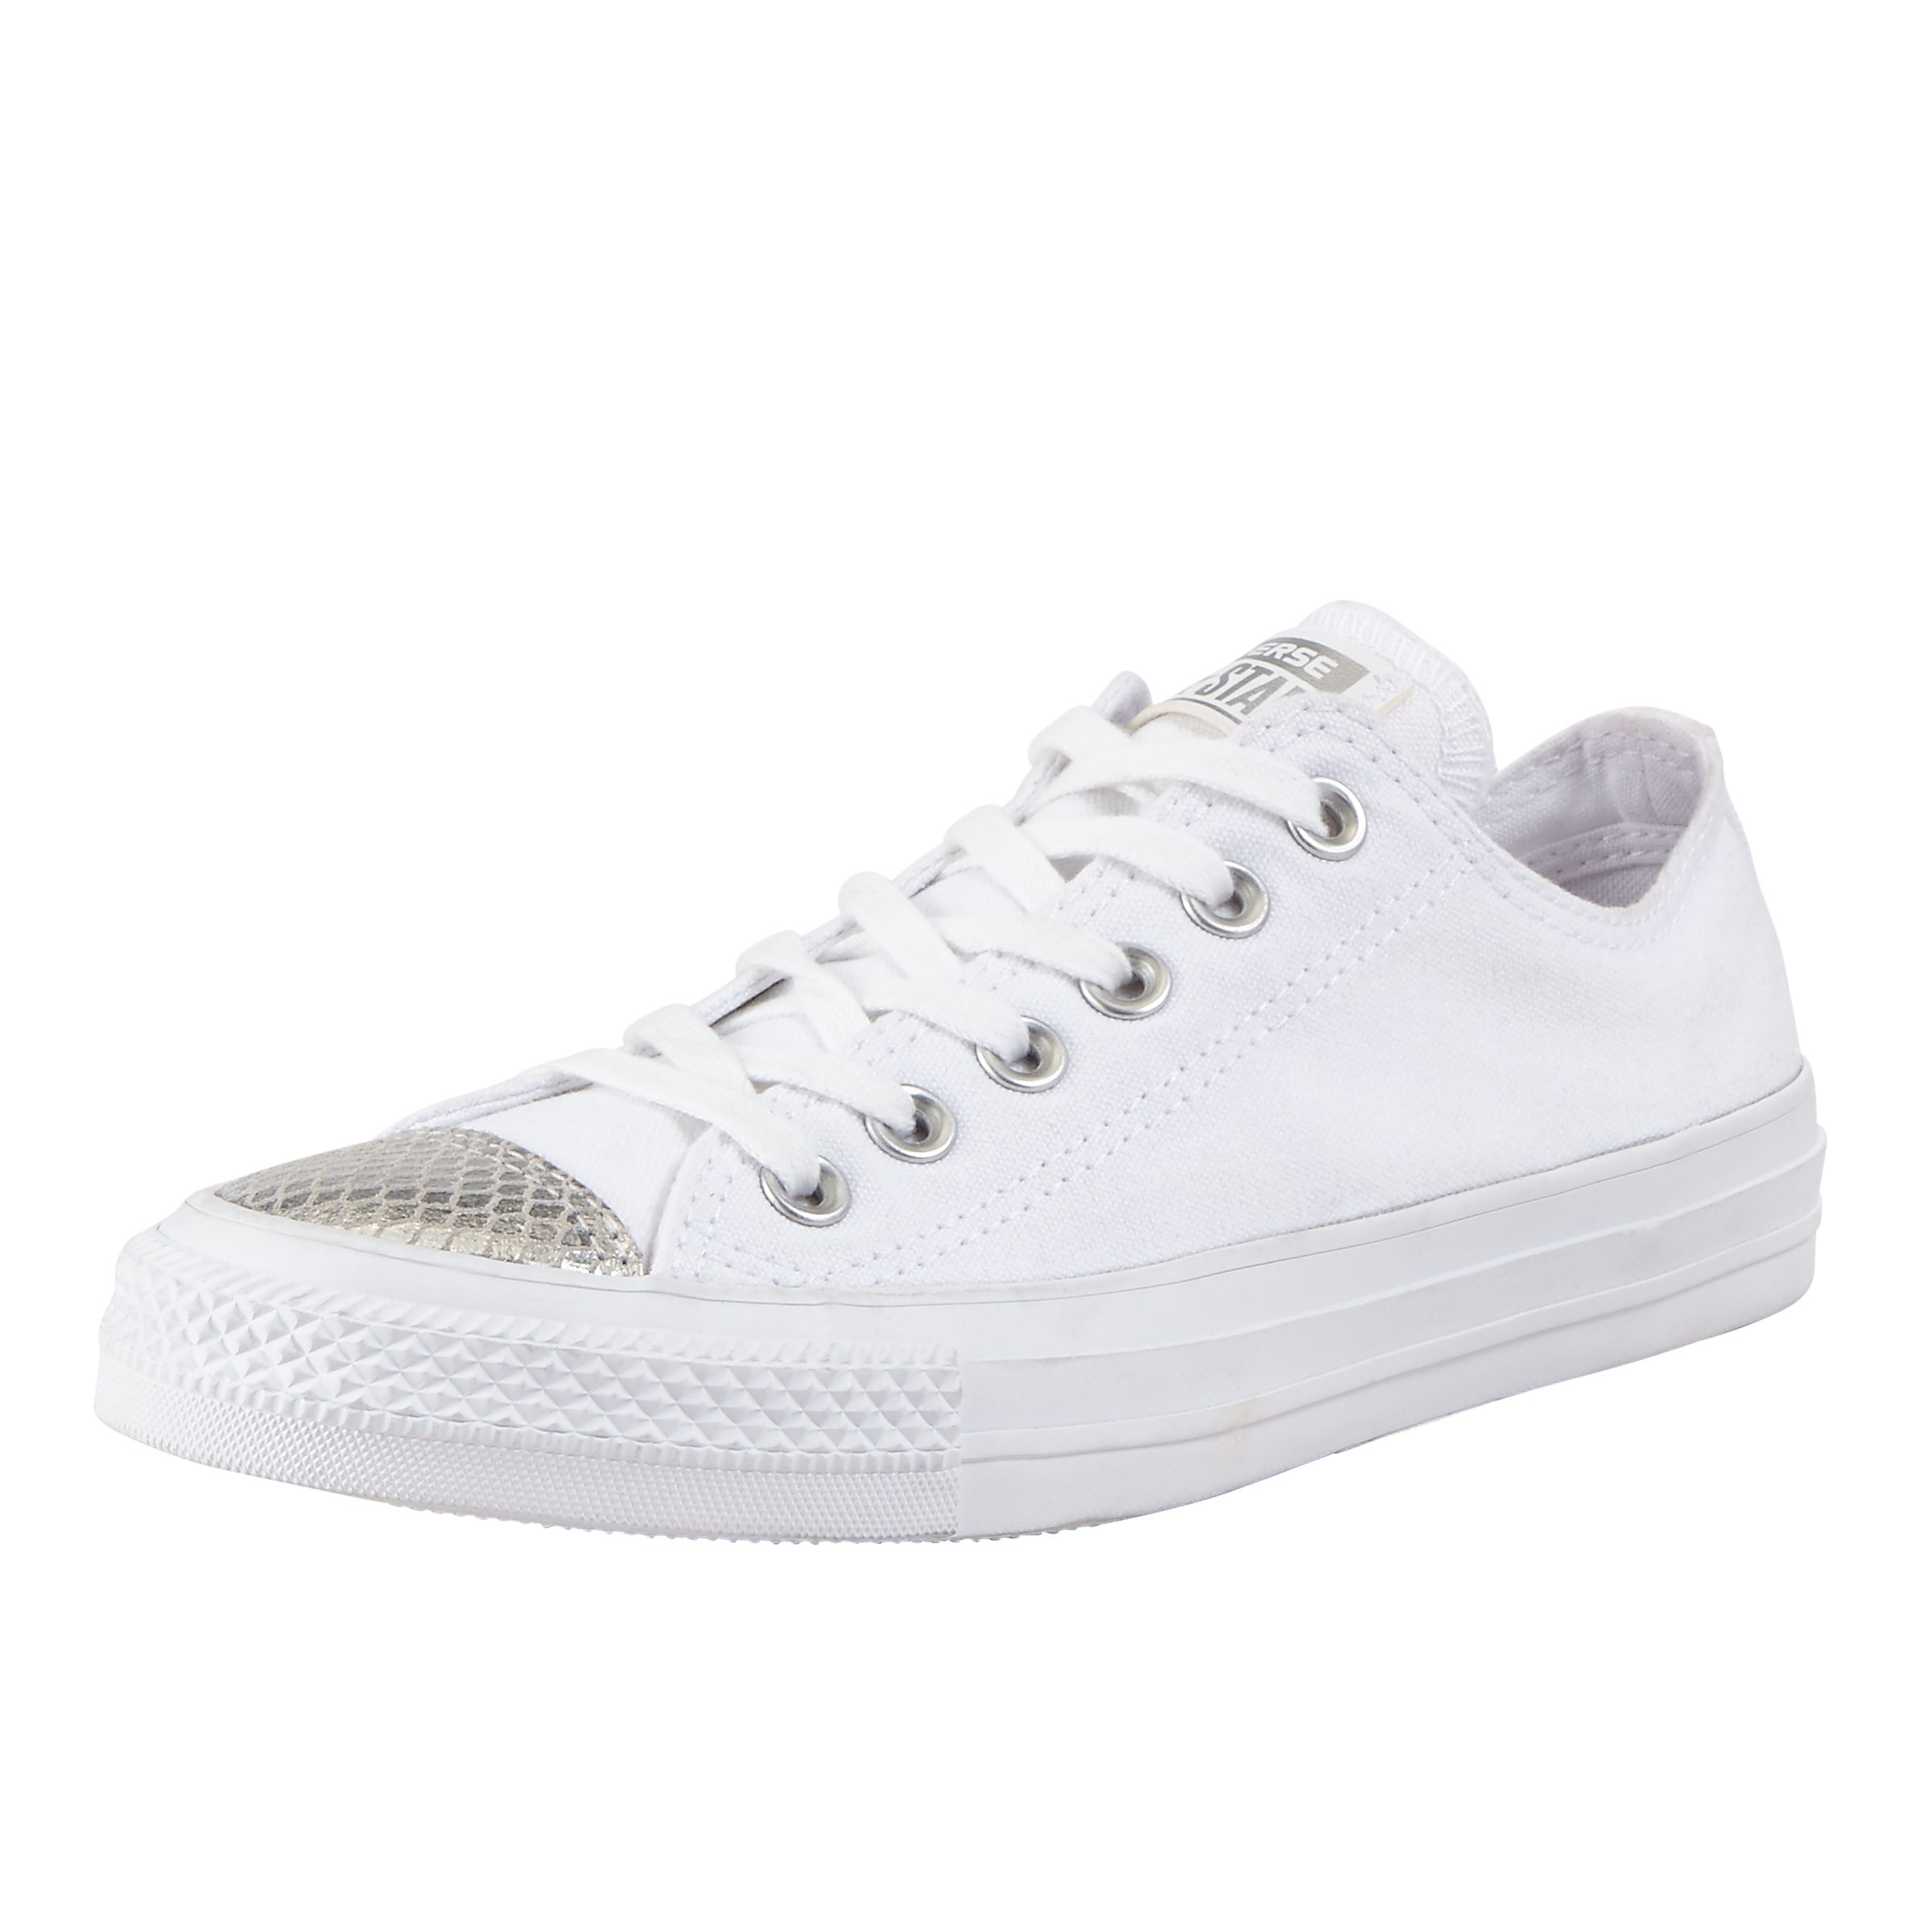 Buy Converse Chuck Taylor All Star Ox Toe Cap Trainers | John Lewis